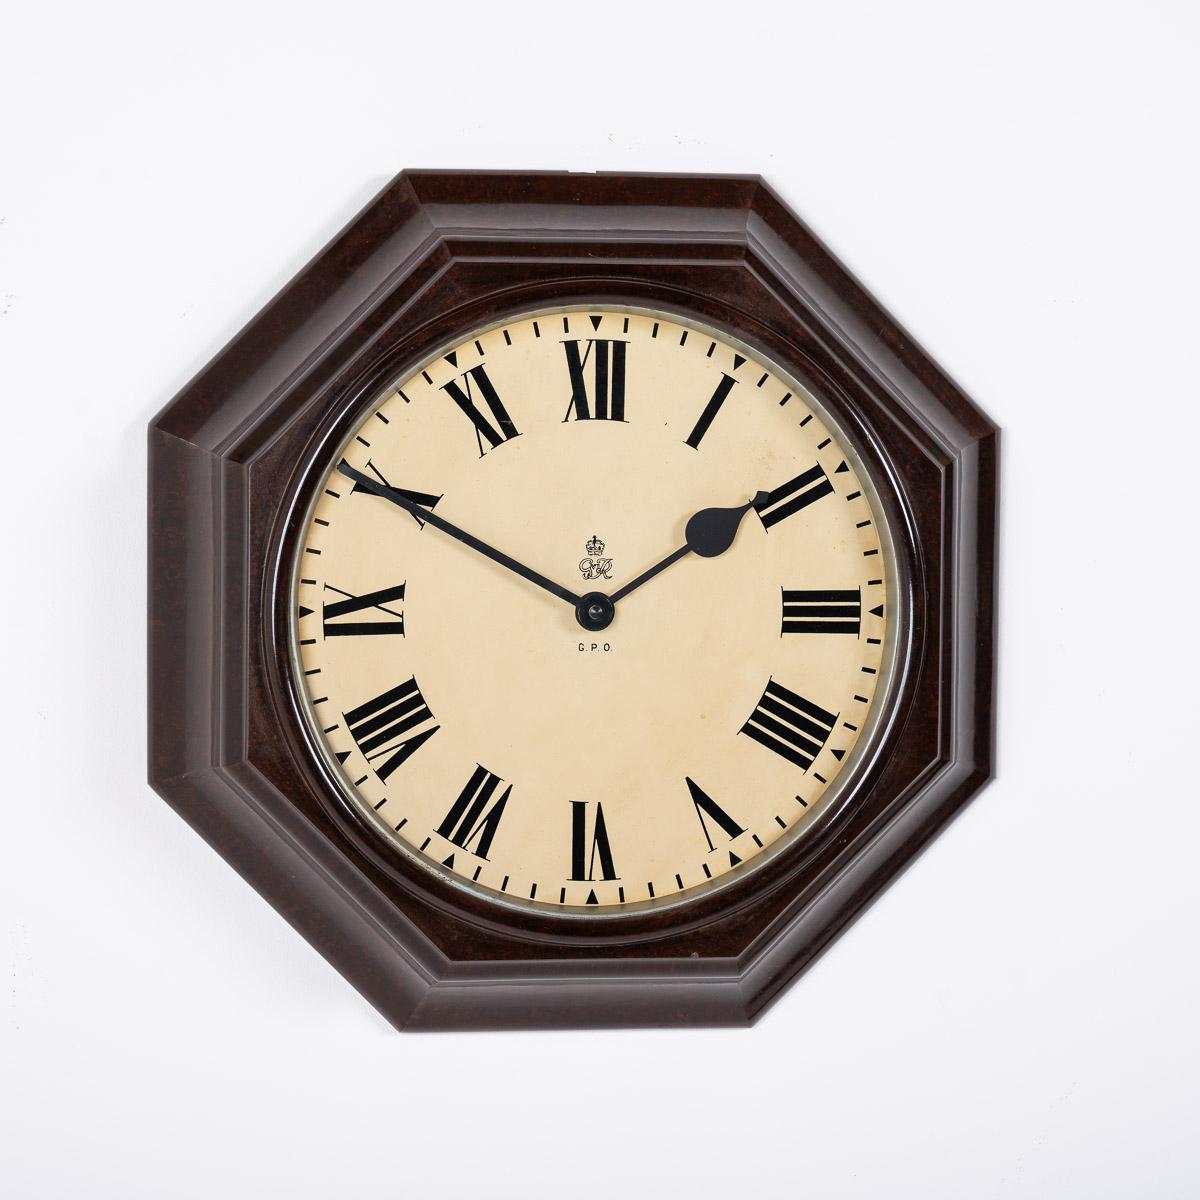 British Large G.P.O Octagonal Bakelite Case Wall Clock By Gents Of Leicester